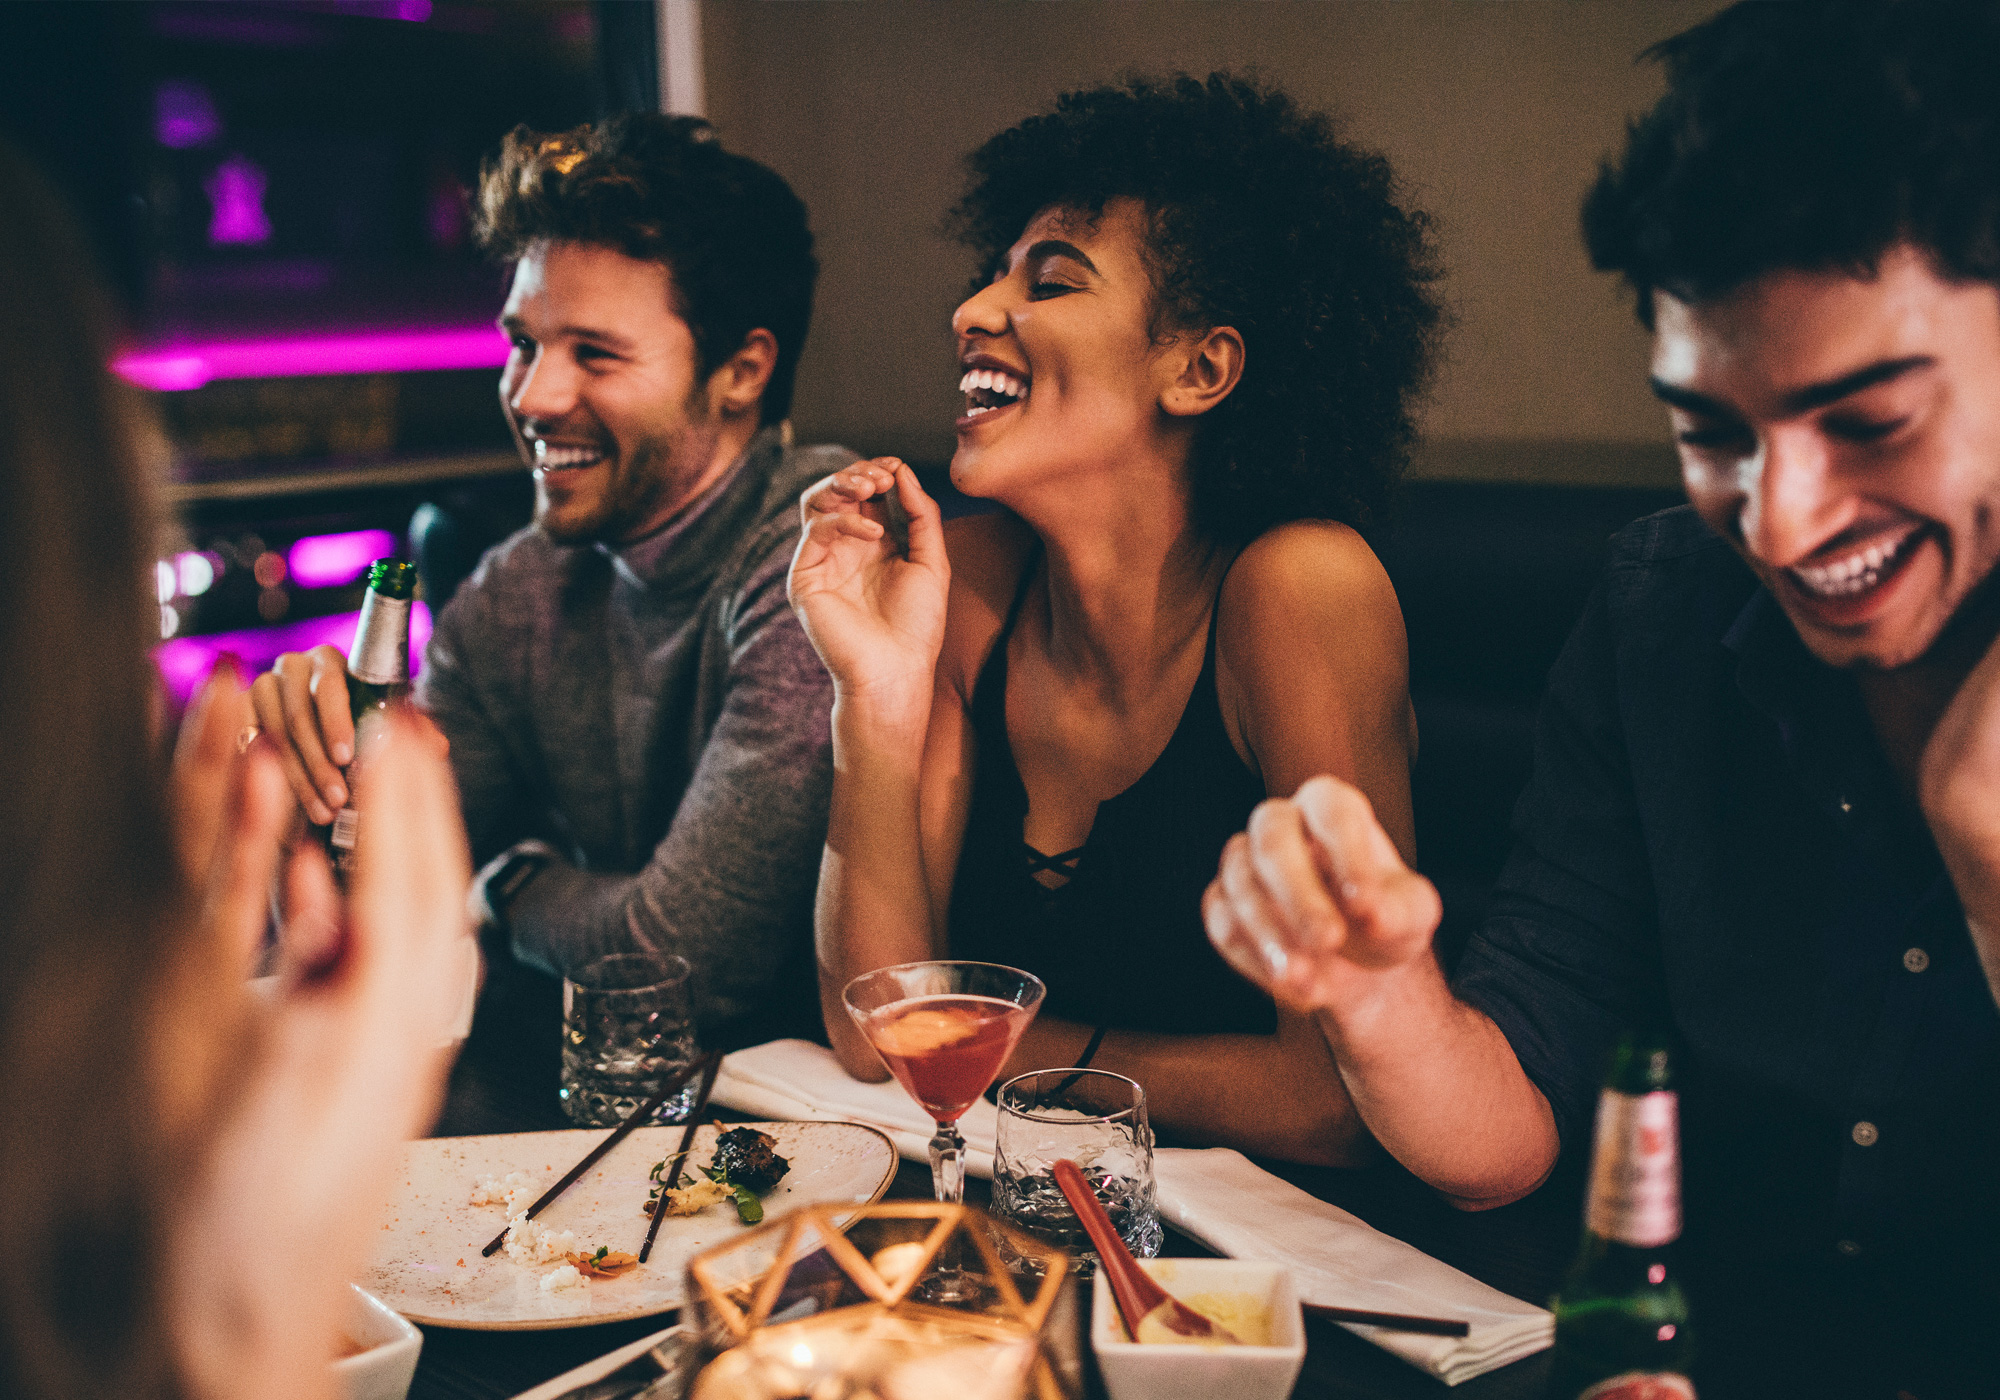 A Group of Friends Laughs and Enjoys Their Time Together Over Dinner at a Restaurant